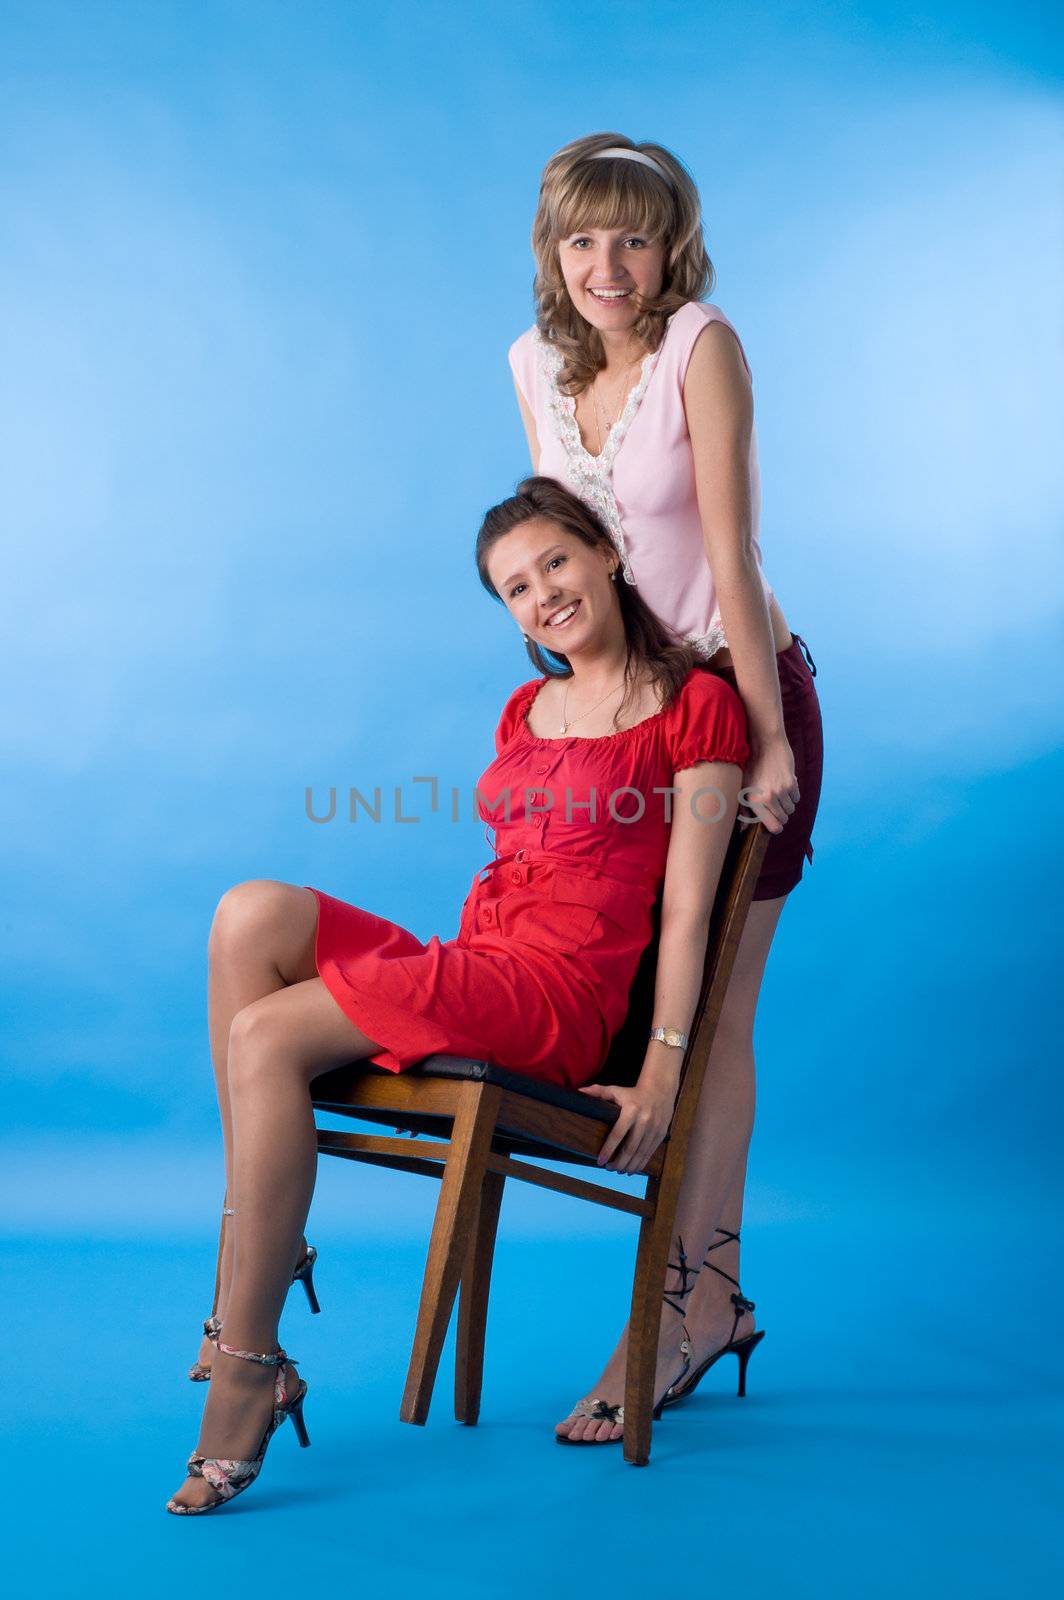 Two girls talk and pose on a blue background